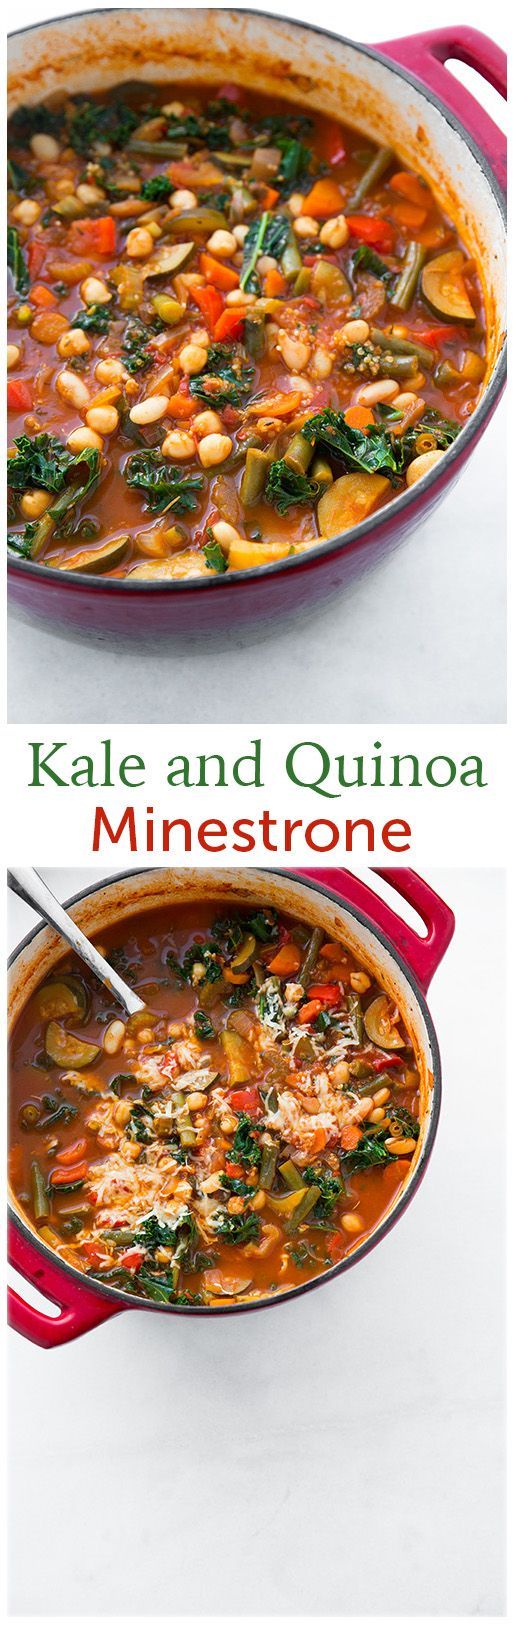 Kale and Quinoa Minestrone – this h